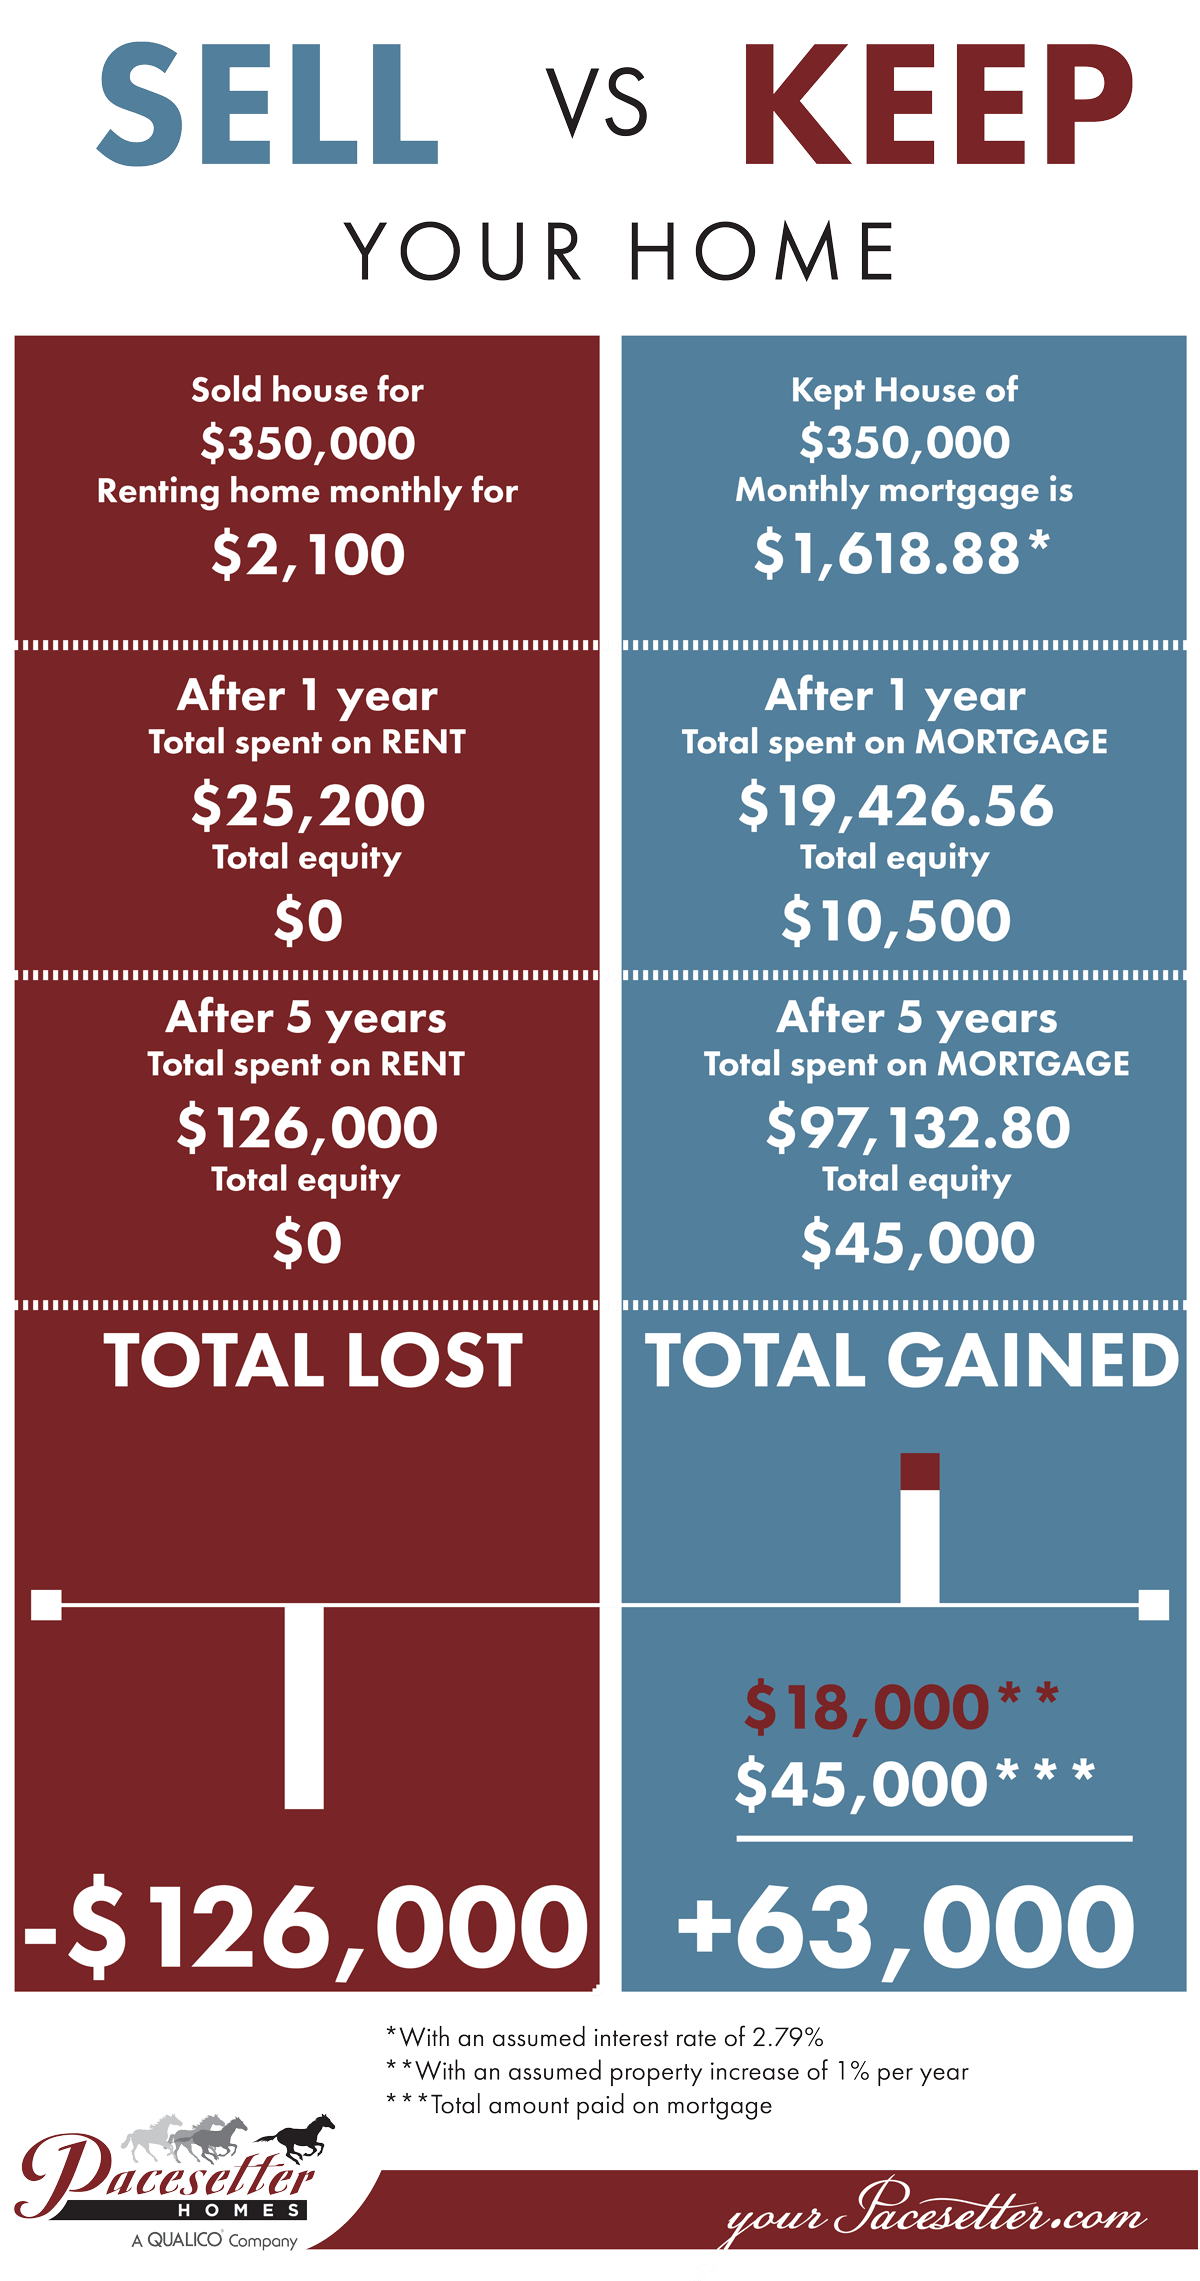 sell-vs-keep-infographic-updated.png